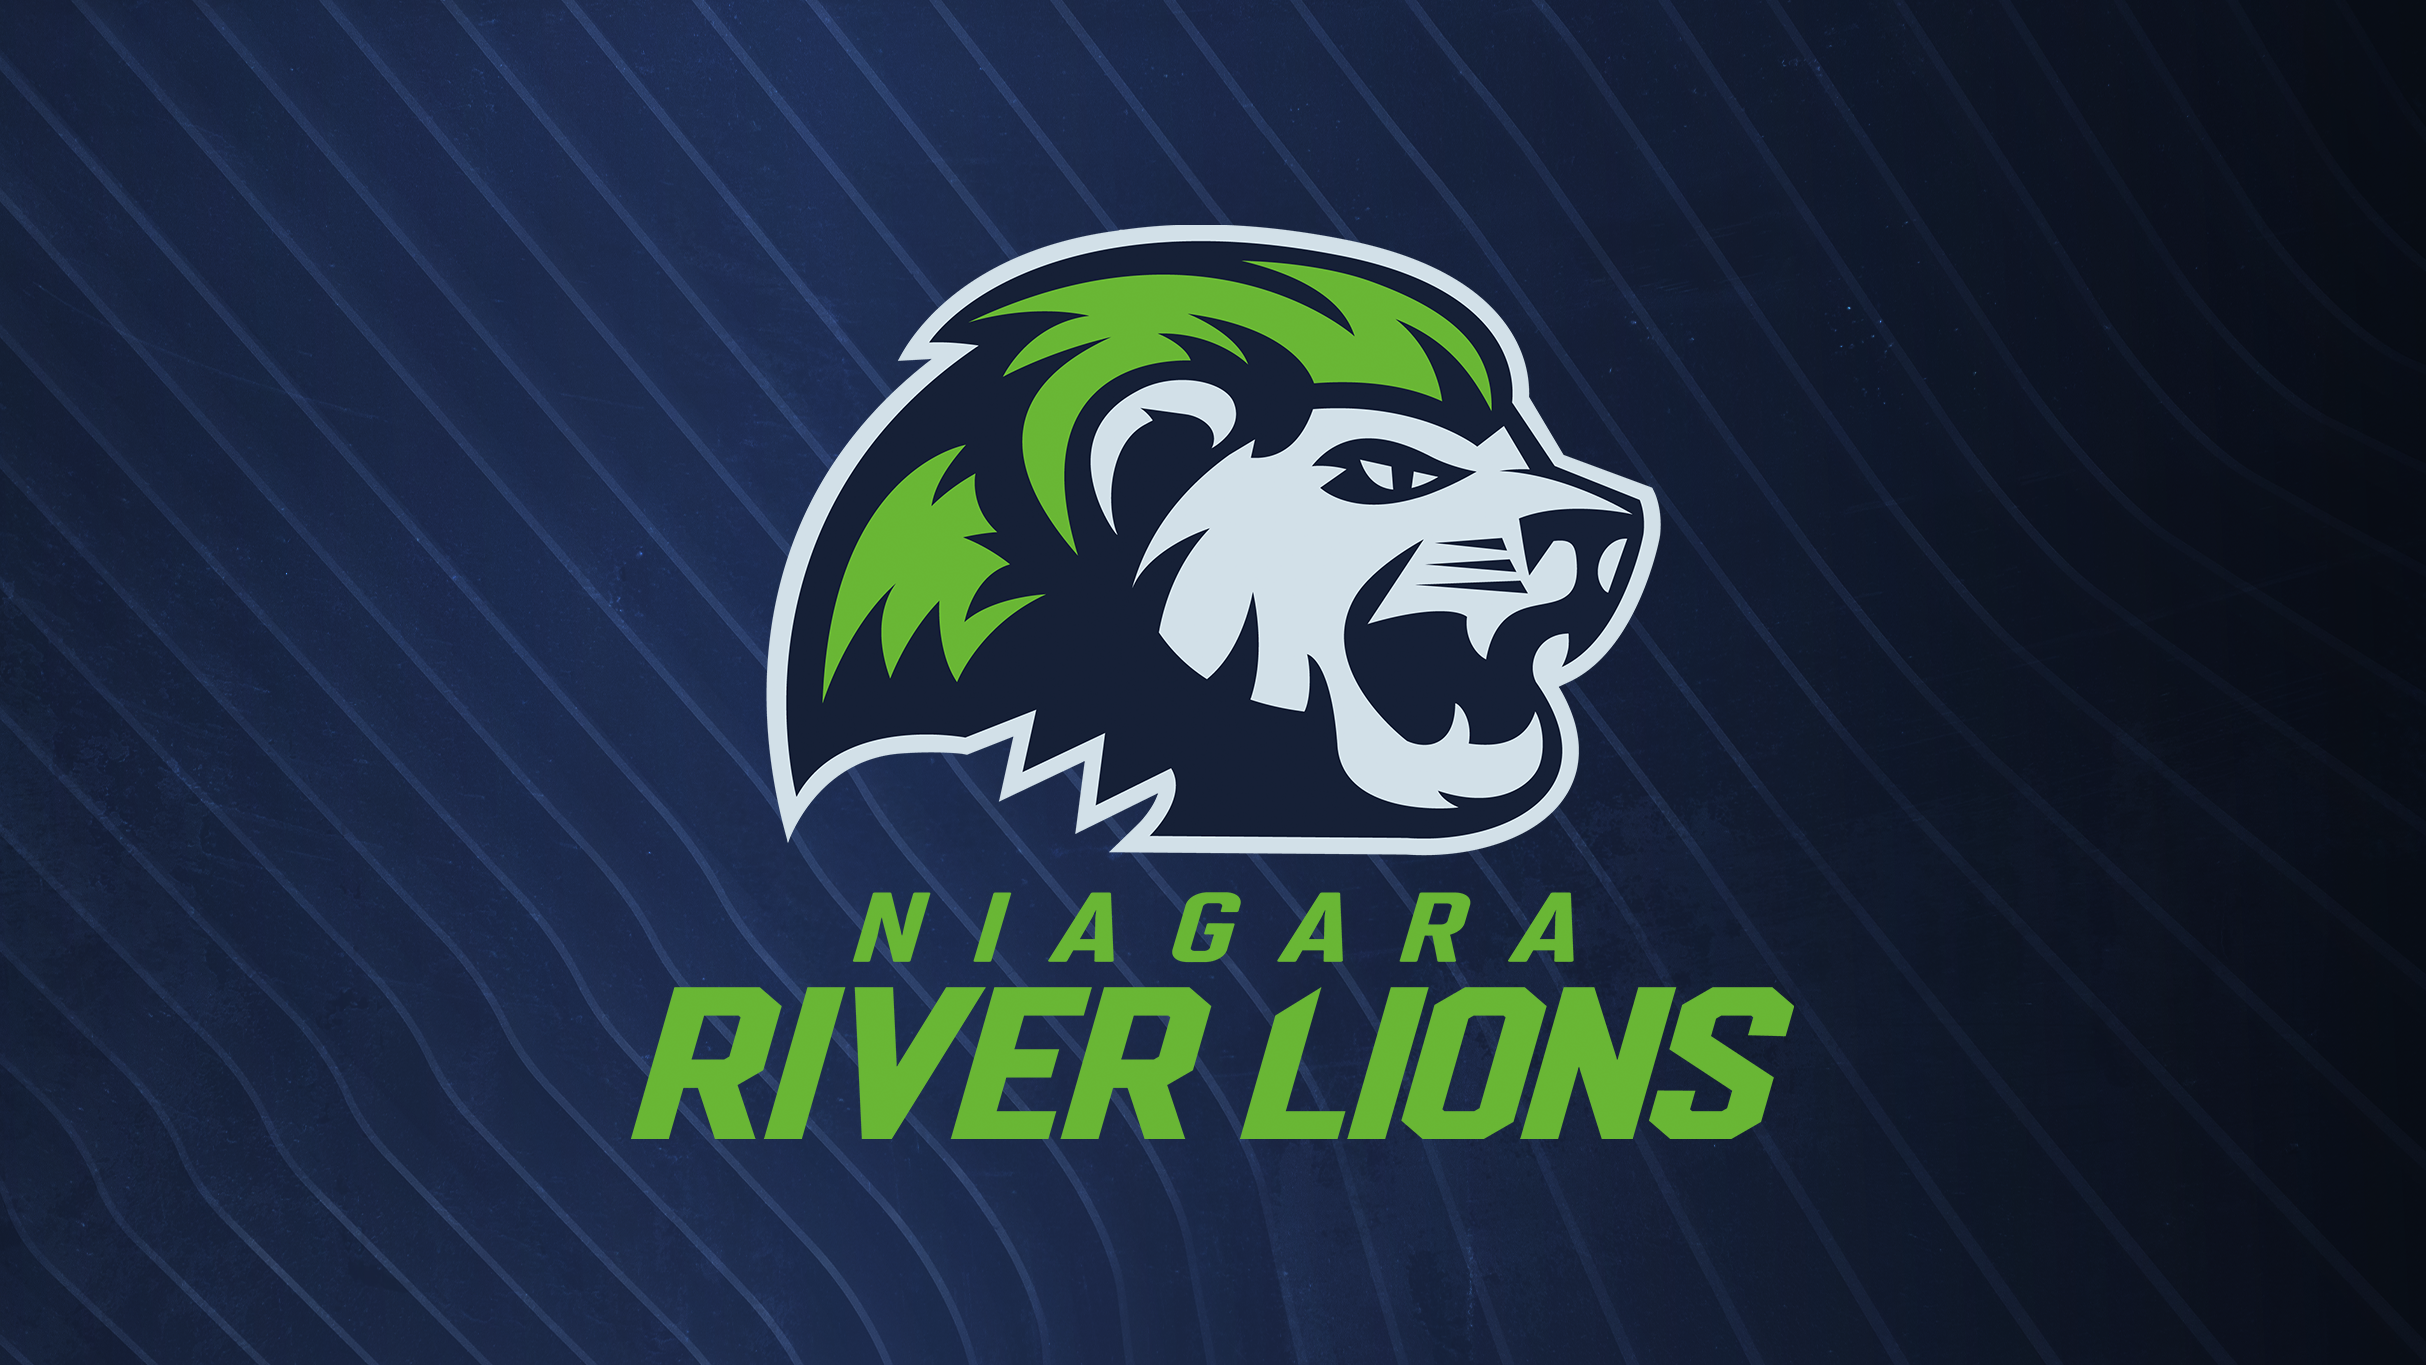 Niagara River Lions presale code for your tickets in St Catharines